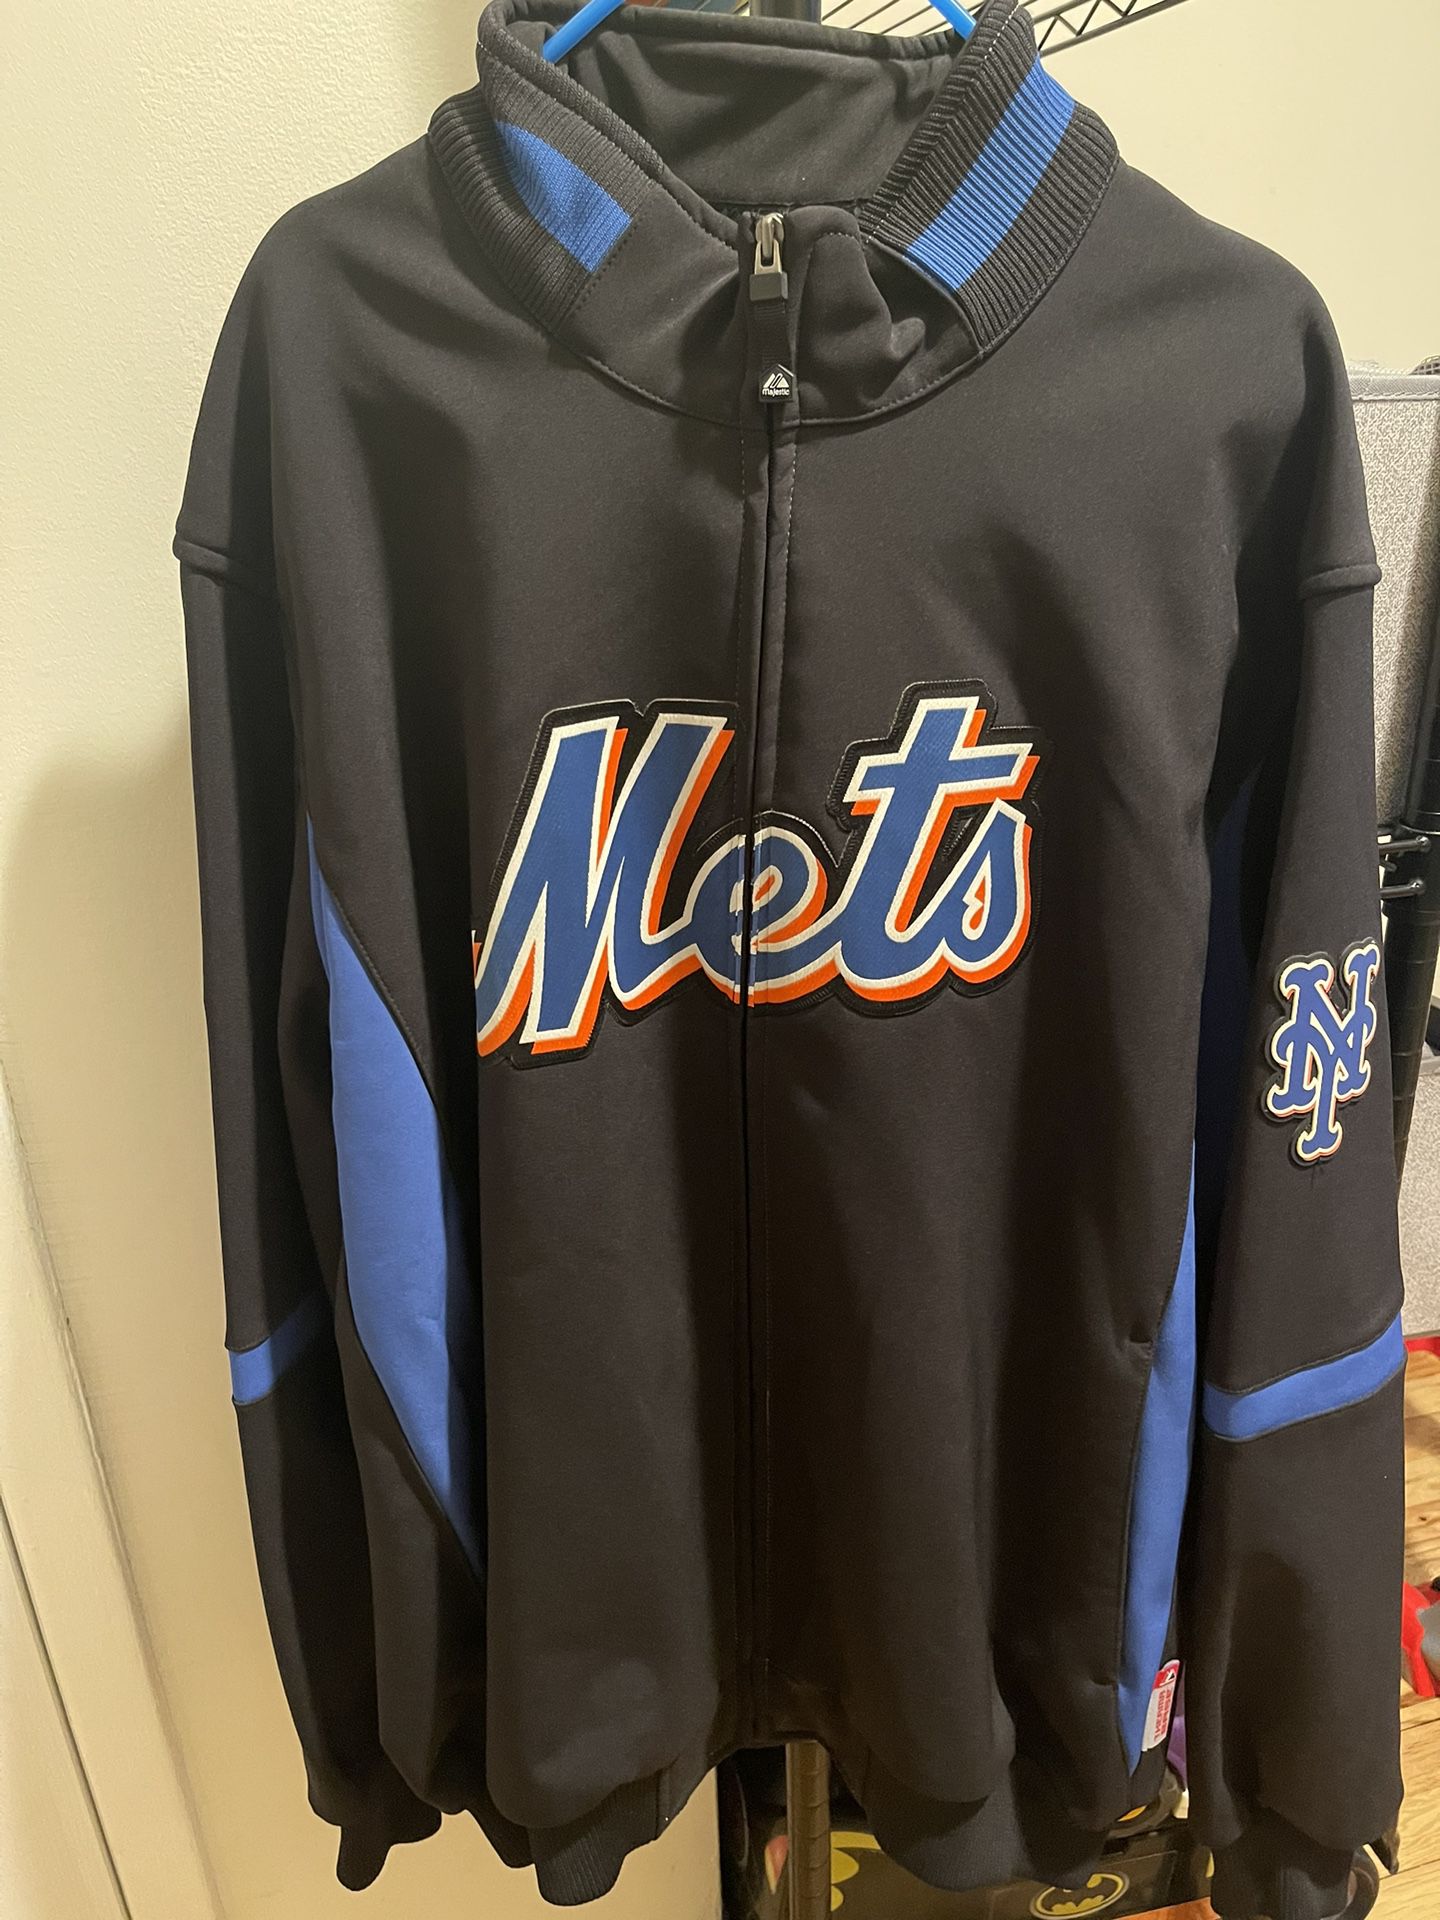 Authentic Majestic MLB NY Mets Black Jacket Men's Size XL for Sale in  Brooklyn, NY - OfferUp